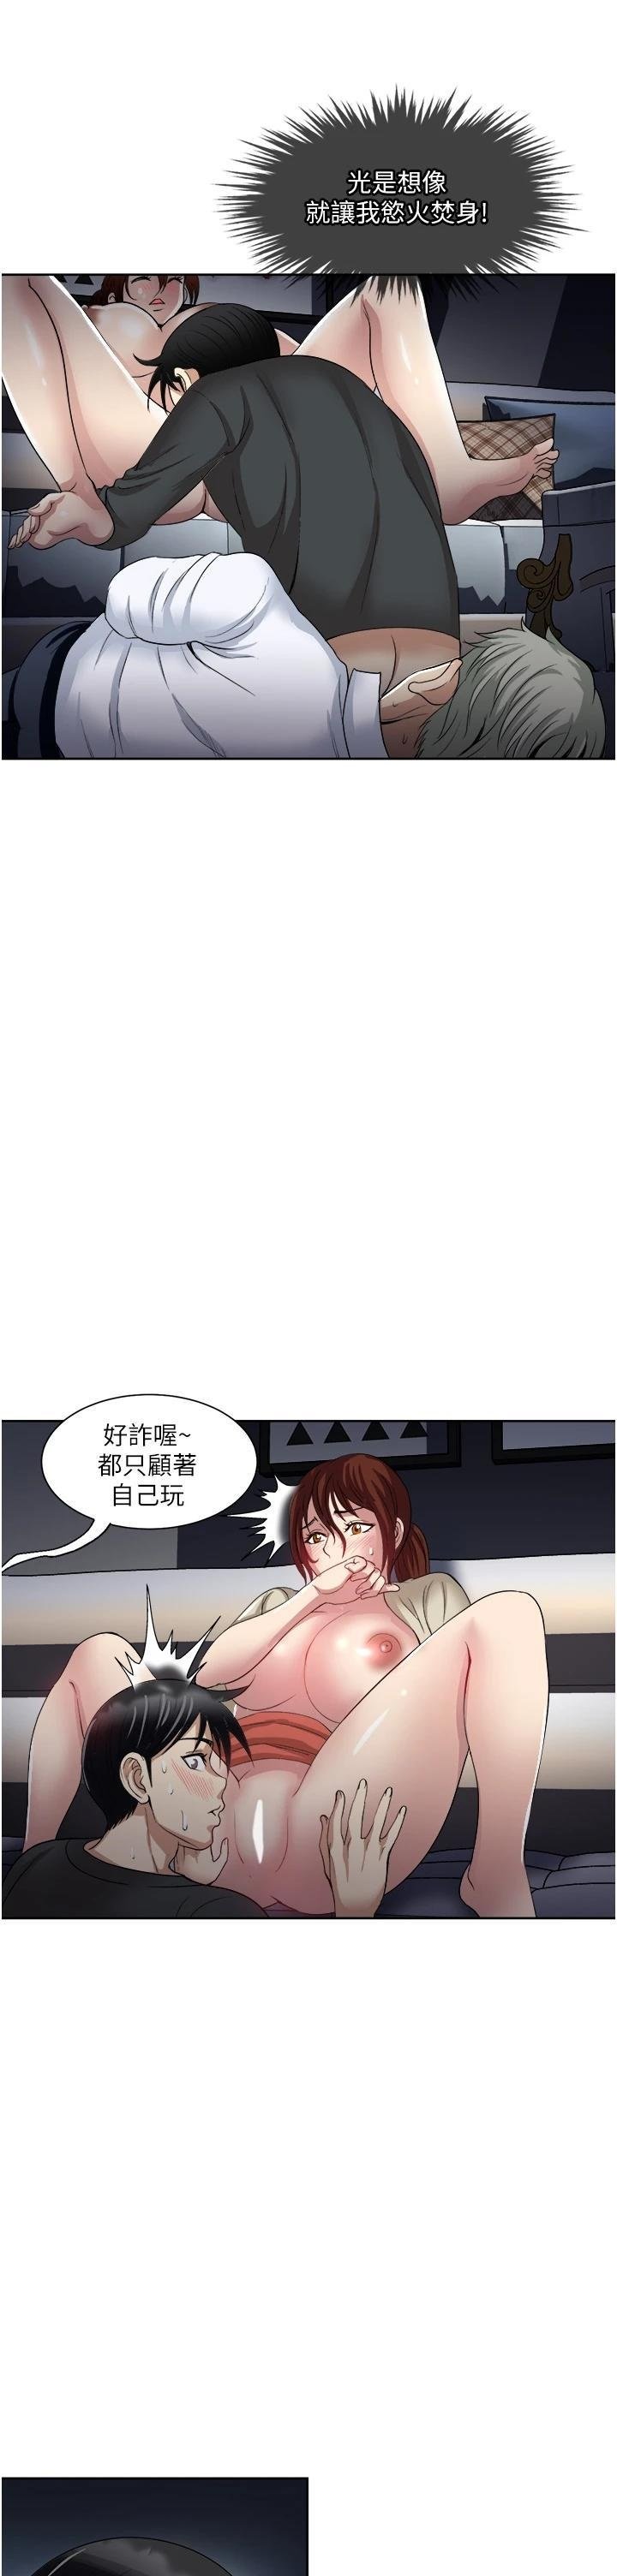 just-once-raw-chap-29-6